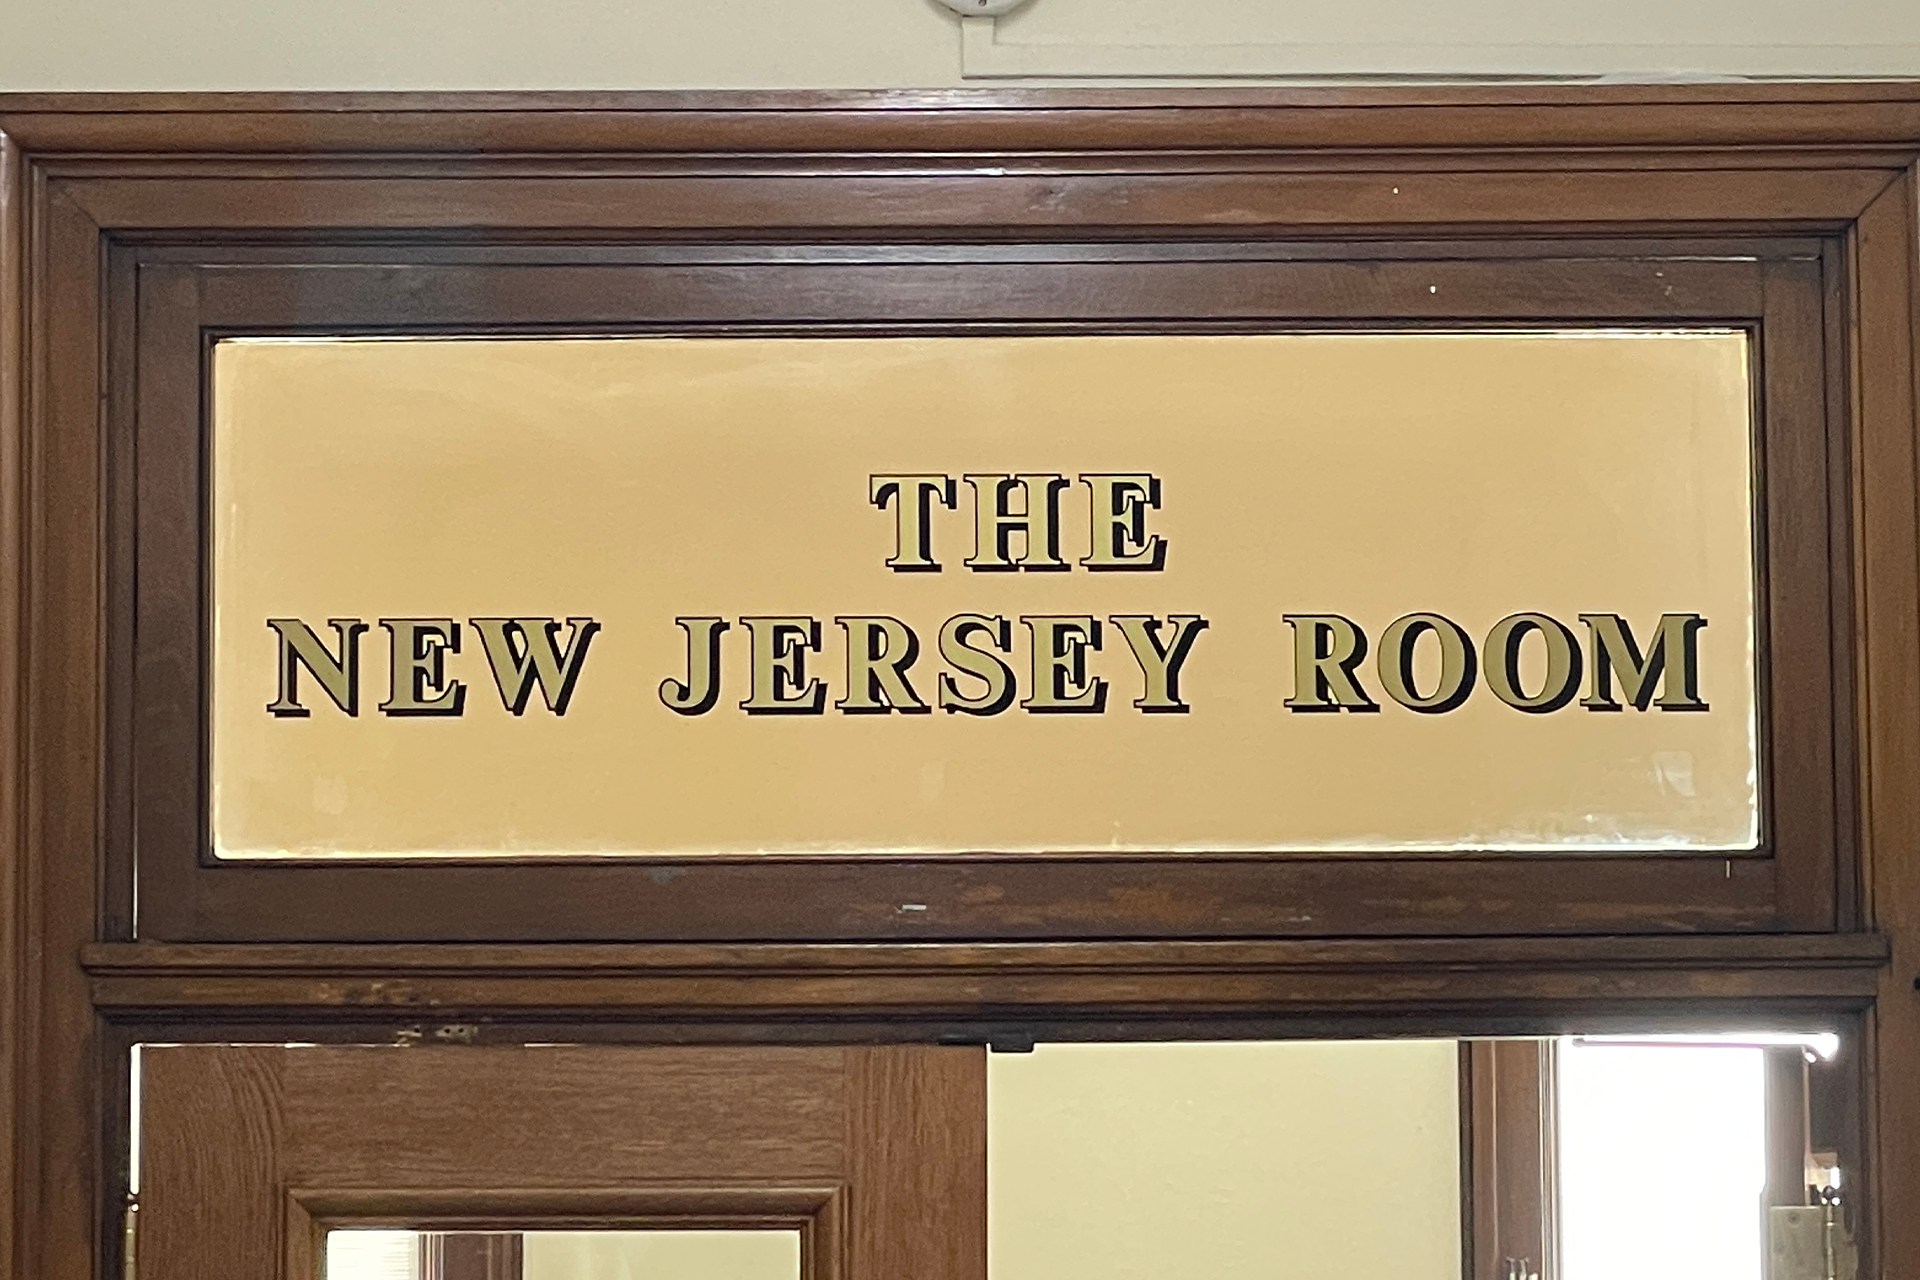 New Jersey Room - Jersey City Free Public Library